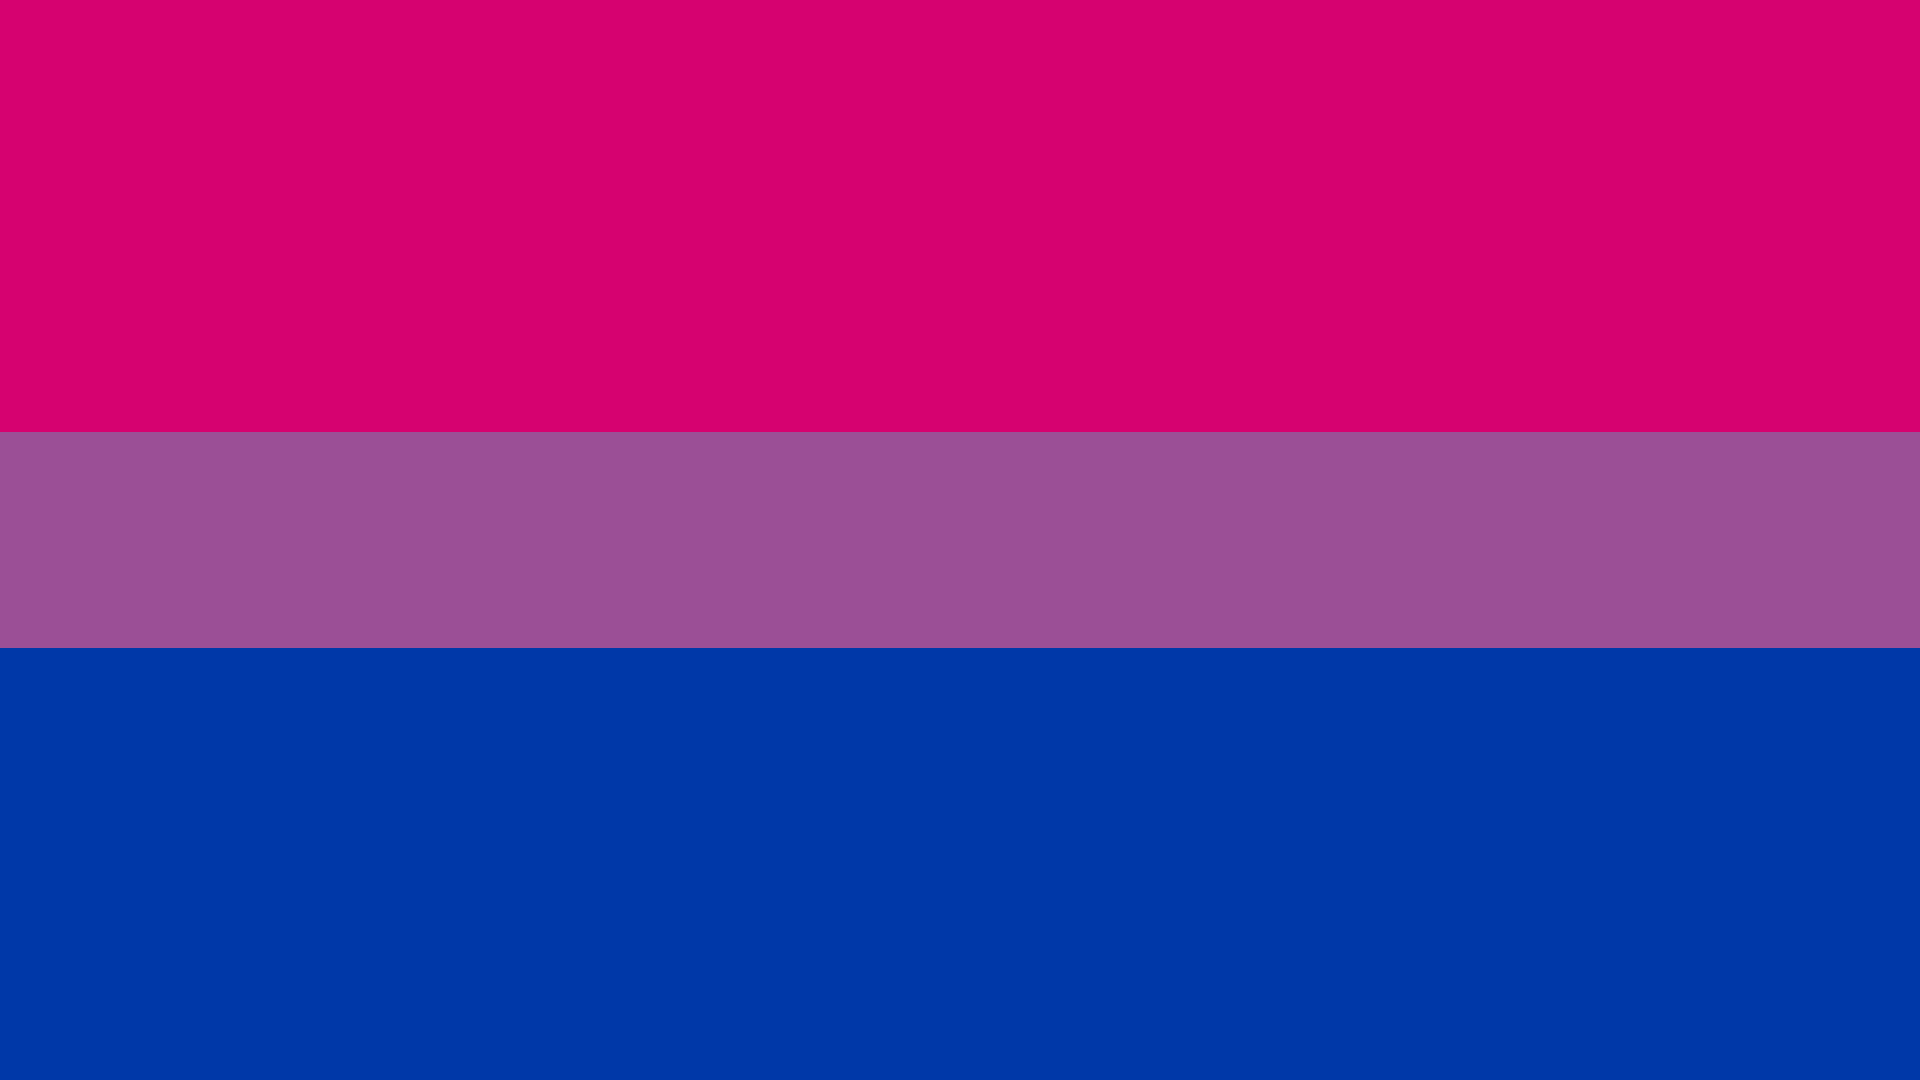 The Bisexual Flag, free to use